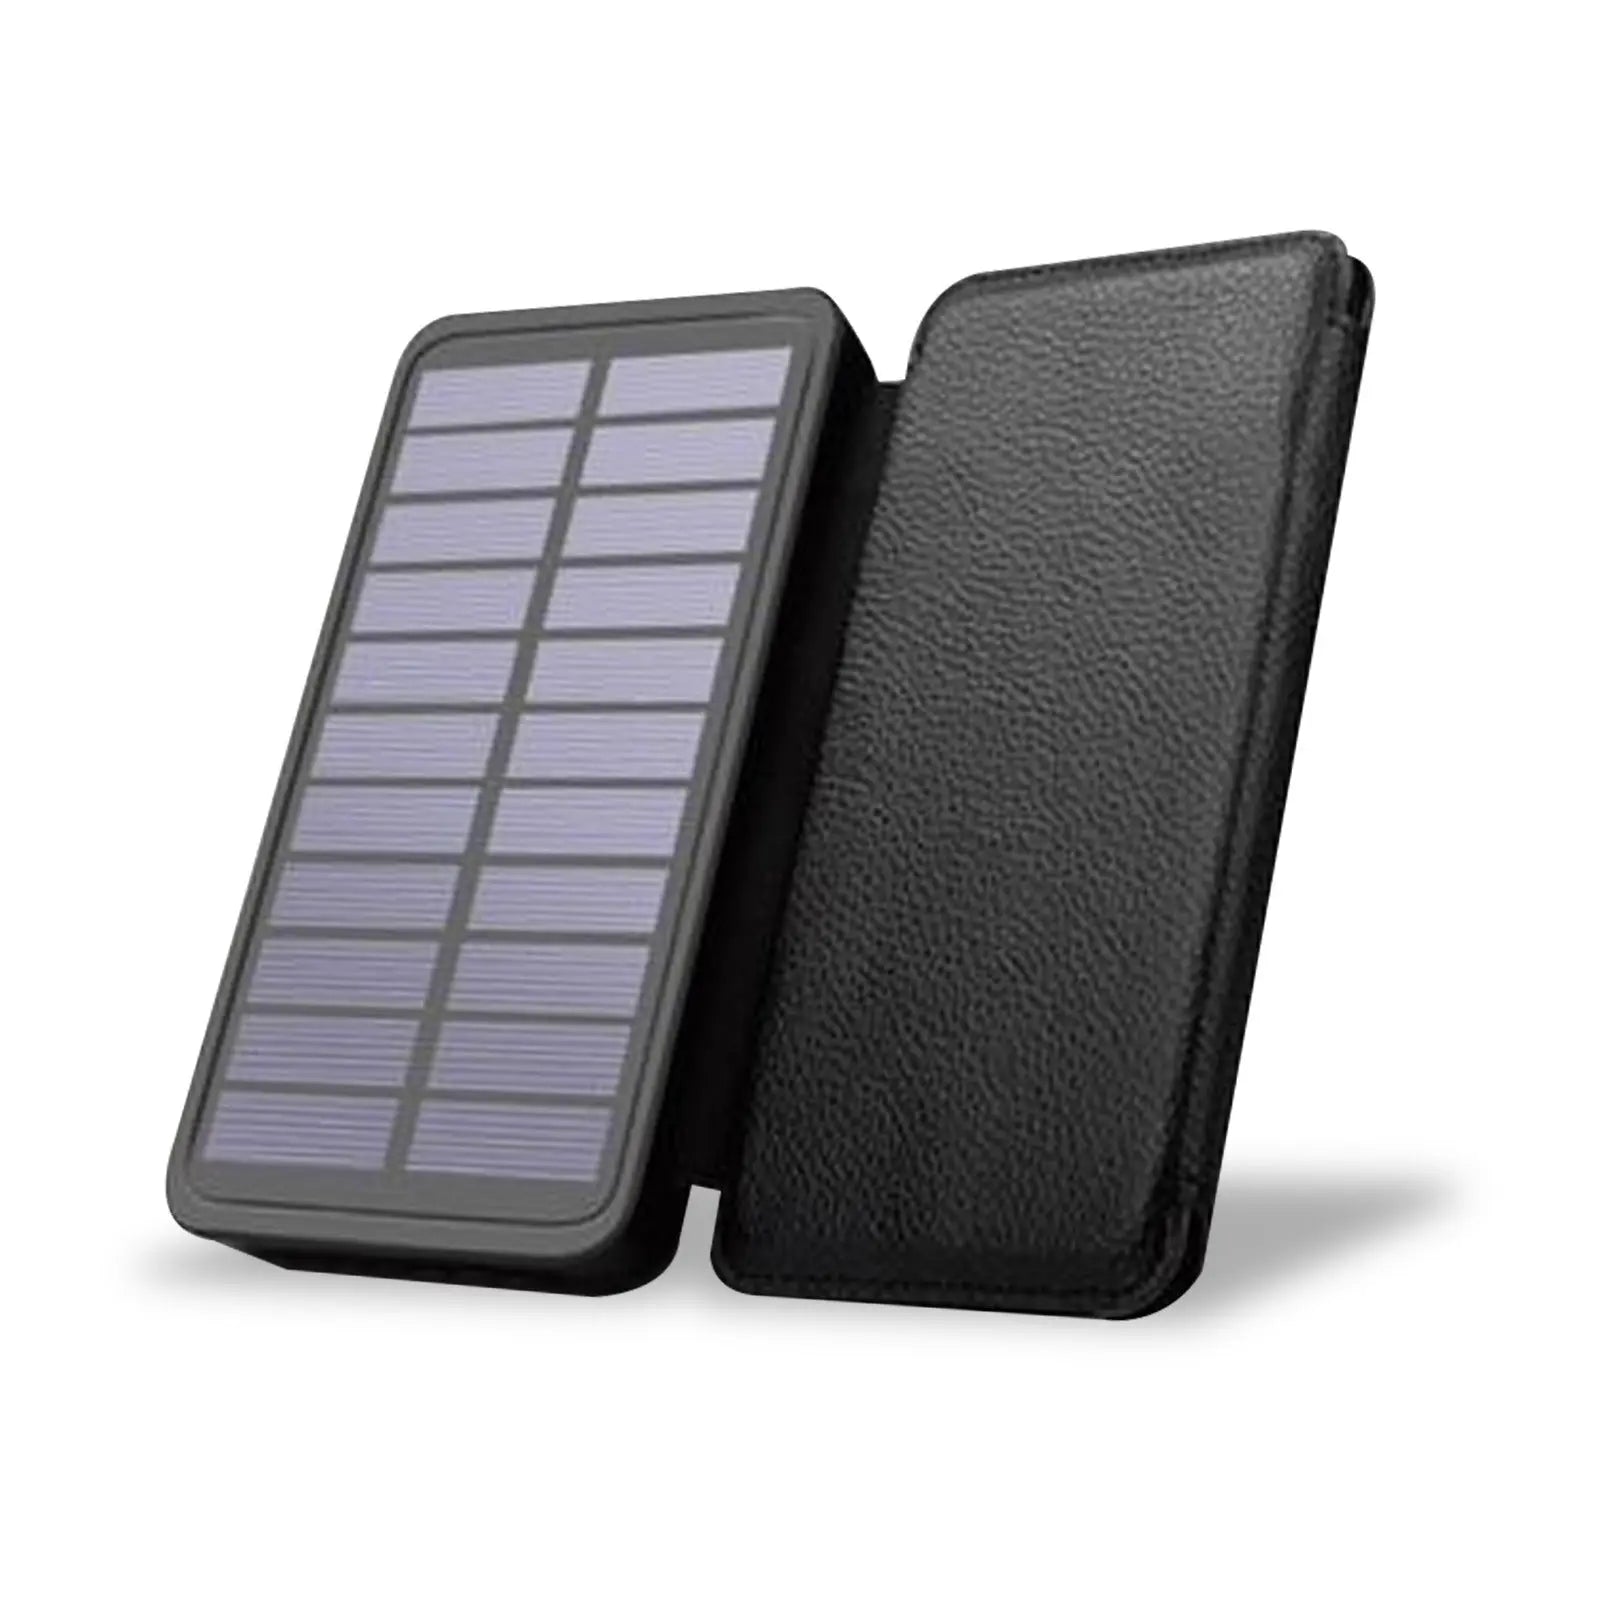 Airox Solar Power bank 10000 Mah 2A Dual Usb Port with Torch